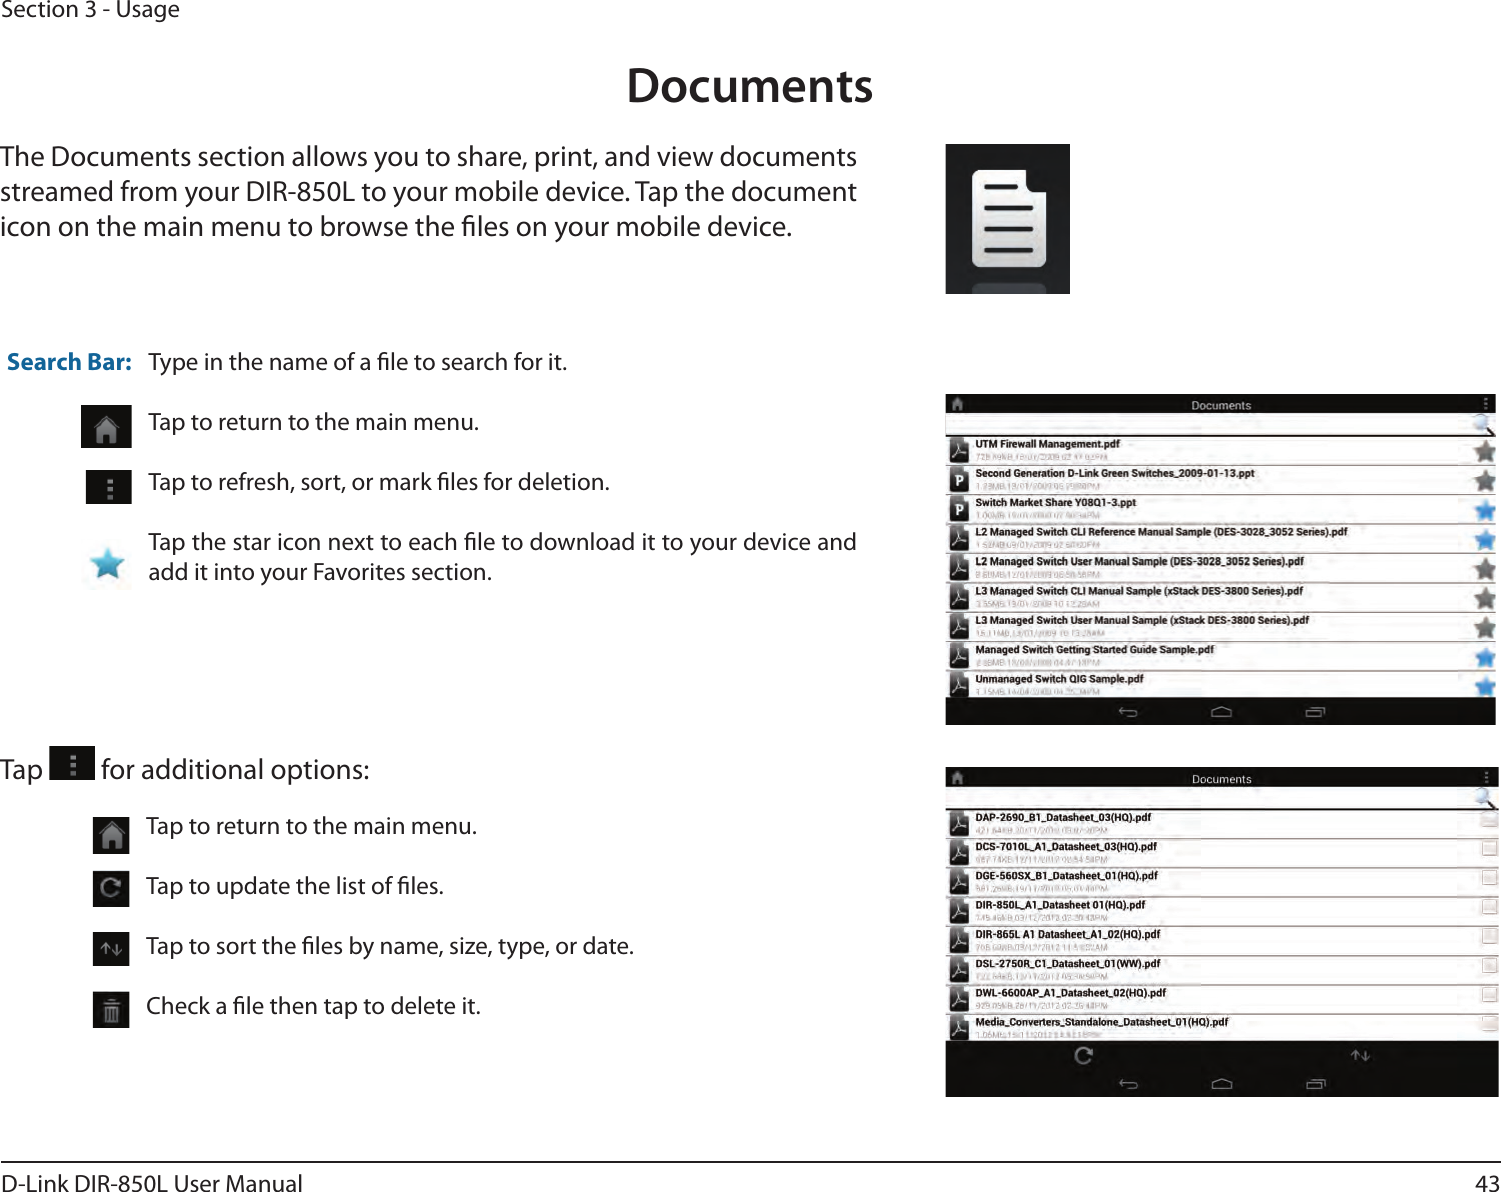 43D-Link DIR-850L User ManualSection 3 - UsageDocumentsThe Documents section allows you to share, print, and view documents streamed from your DIR-850L to your mobile device. Tap the document icon on the main menu to browse the les on your mobile device.Type in the name of a le to search for it.Tap to return to the main menu.Tap to refresh, sort, or mark les for deletion.Tap the star icon next to each le to download it to your device and add it into your Favorites section.Search Bar:Tap   for additional options:Tap to return to the main menu.Tap to update the list of les.Tap to sort the les by name, size, type, or date.Check a le then tap to delete it.